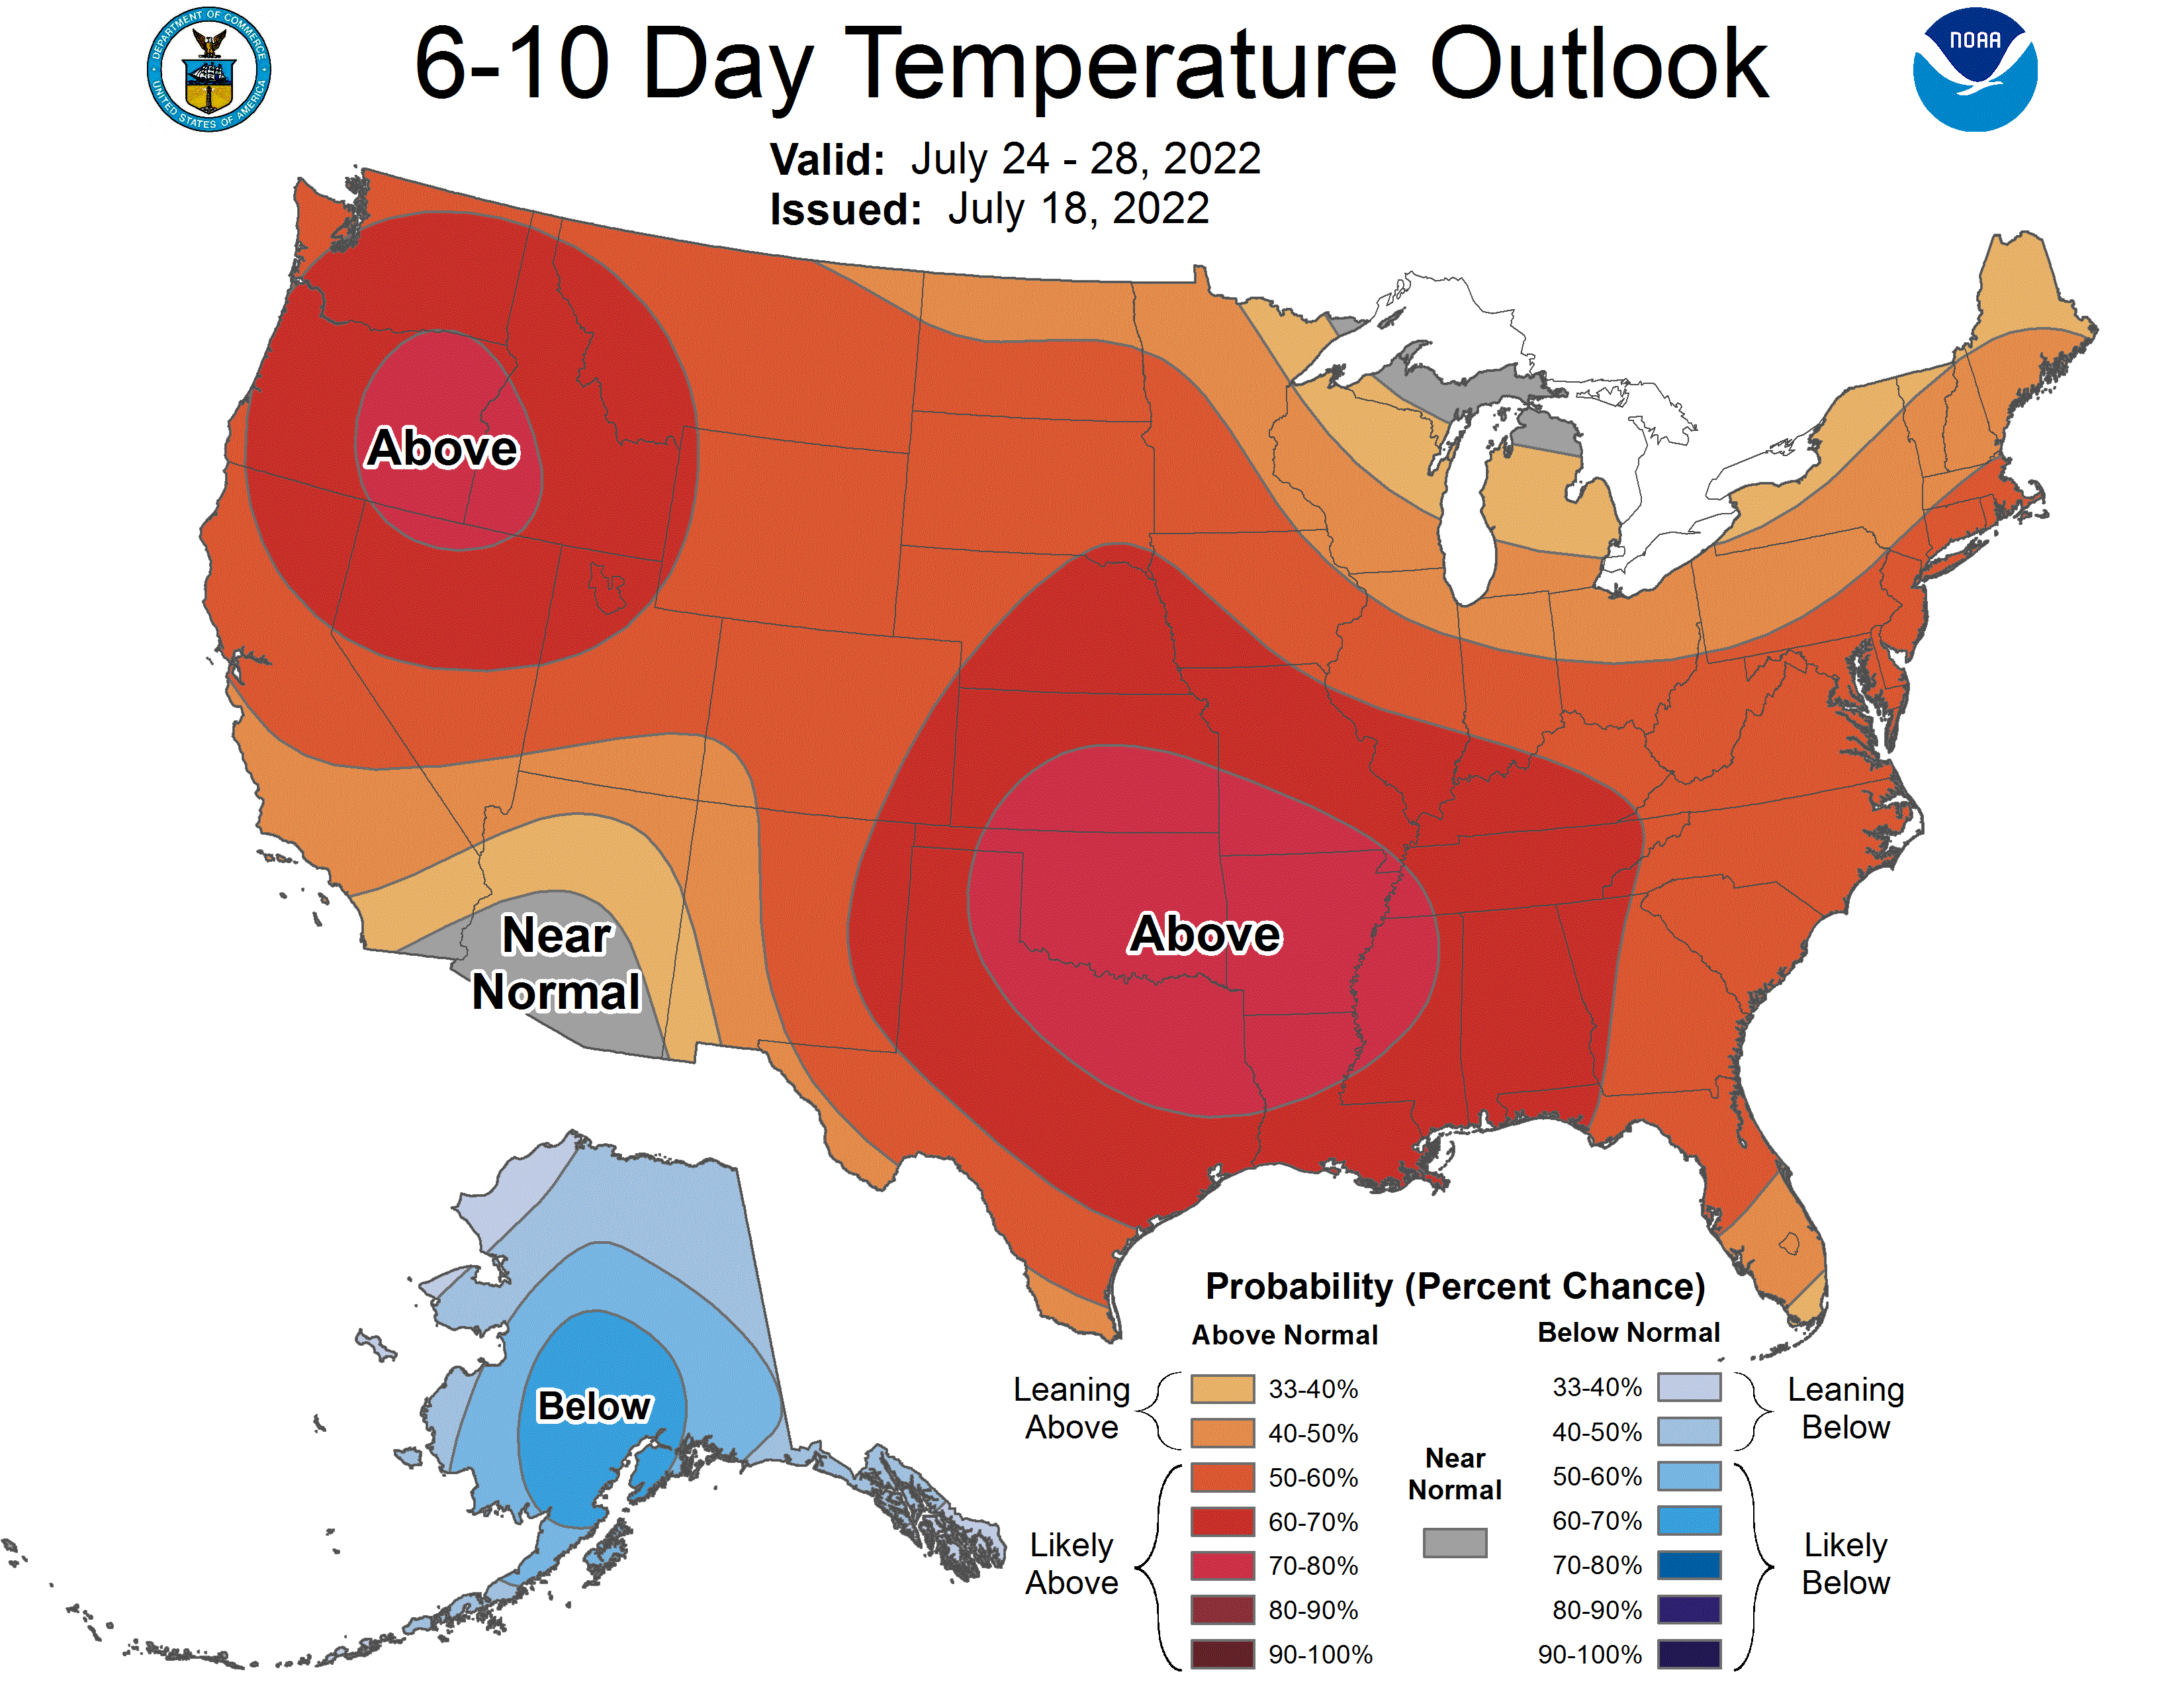 6-10 day temperature outlook